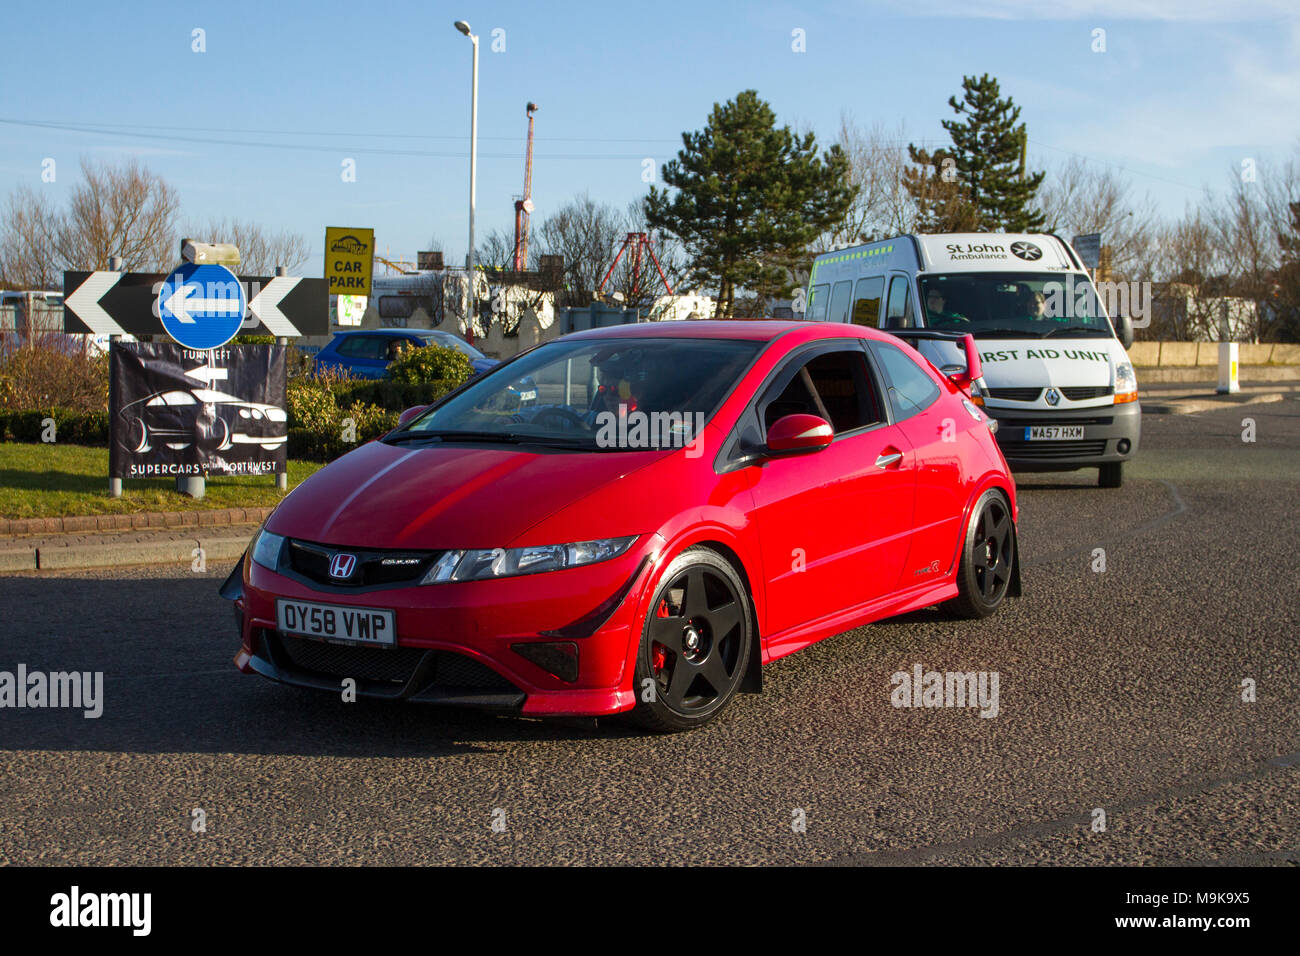 08 Red Honda Civic Type R Gt I Vtec At The North West Supercar Event As Cars And Tourists Arrive In The Coastal Resort On A Warm Spring Day Stock Photo Alamy